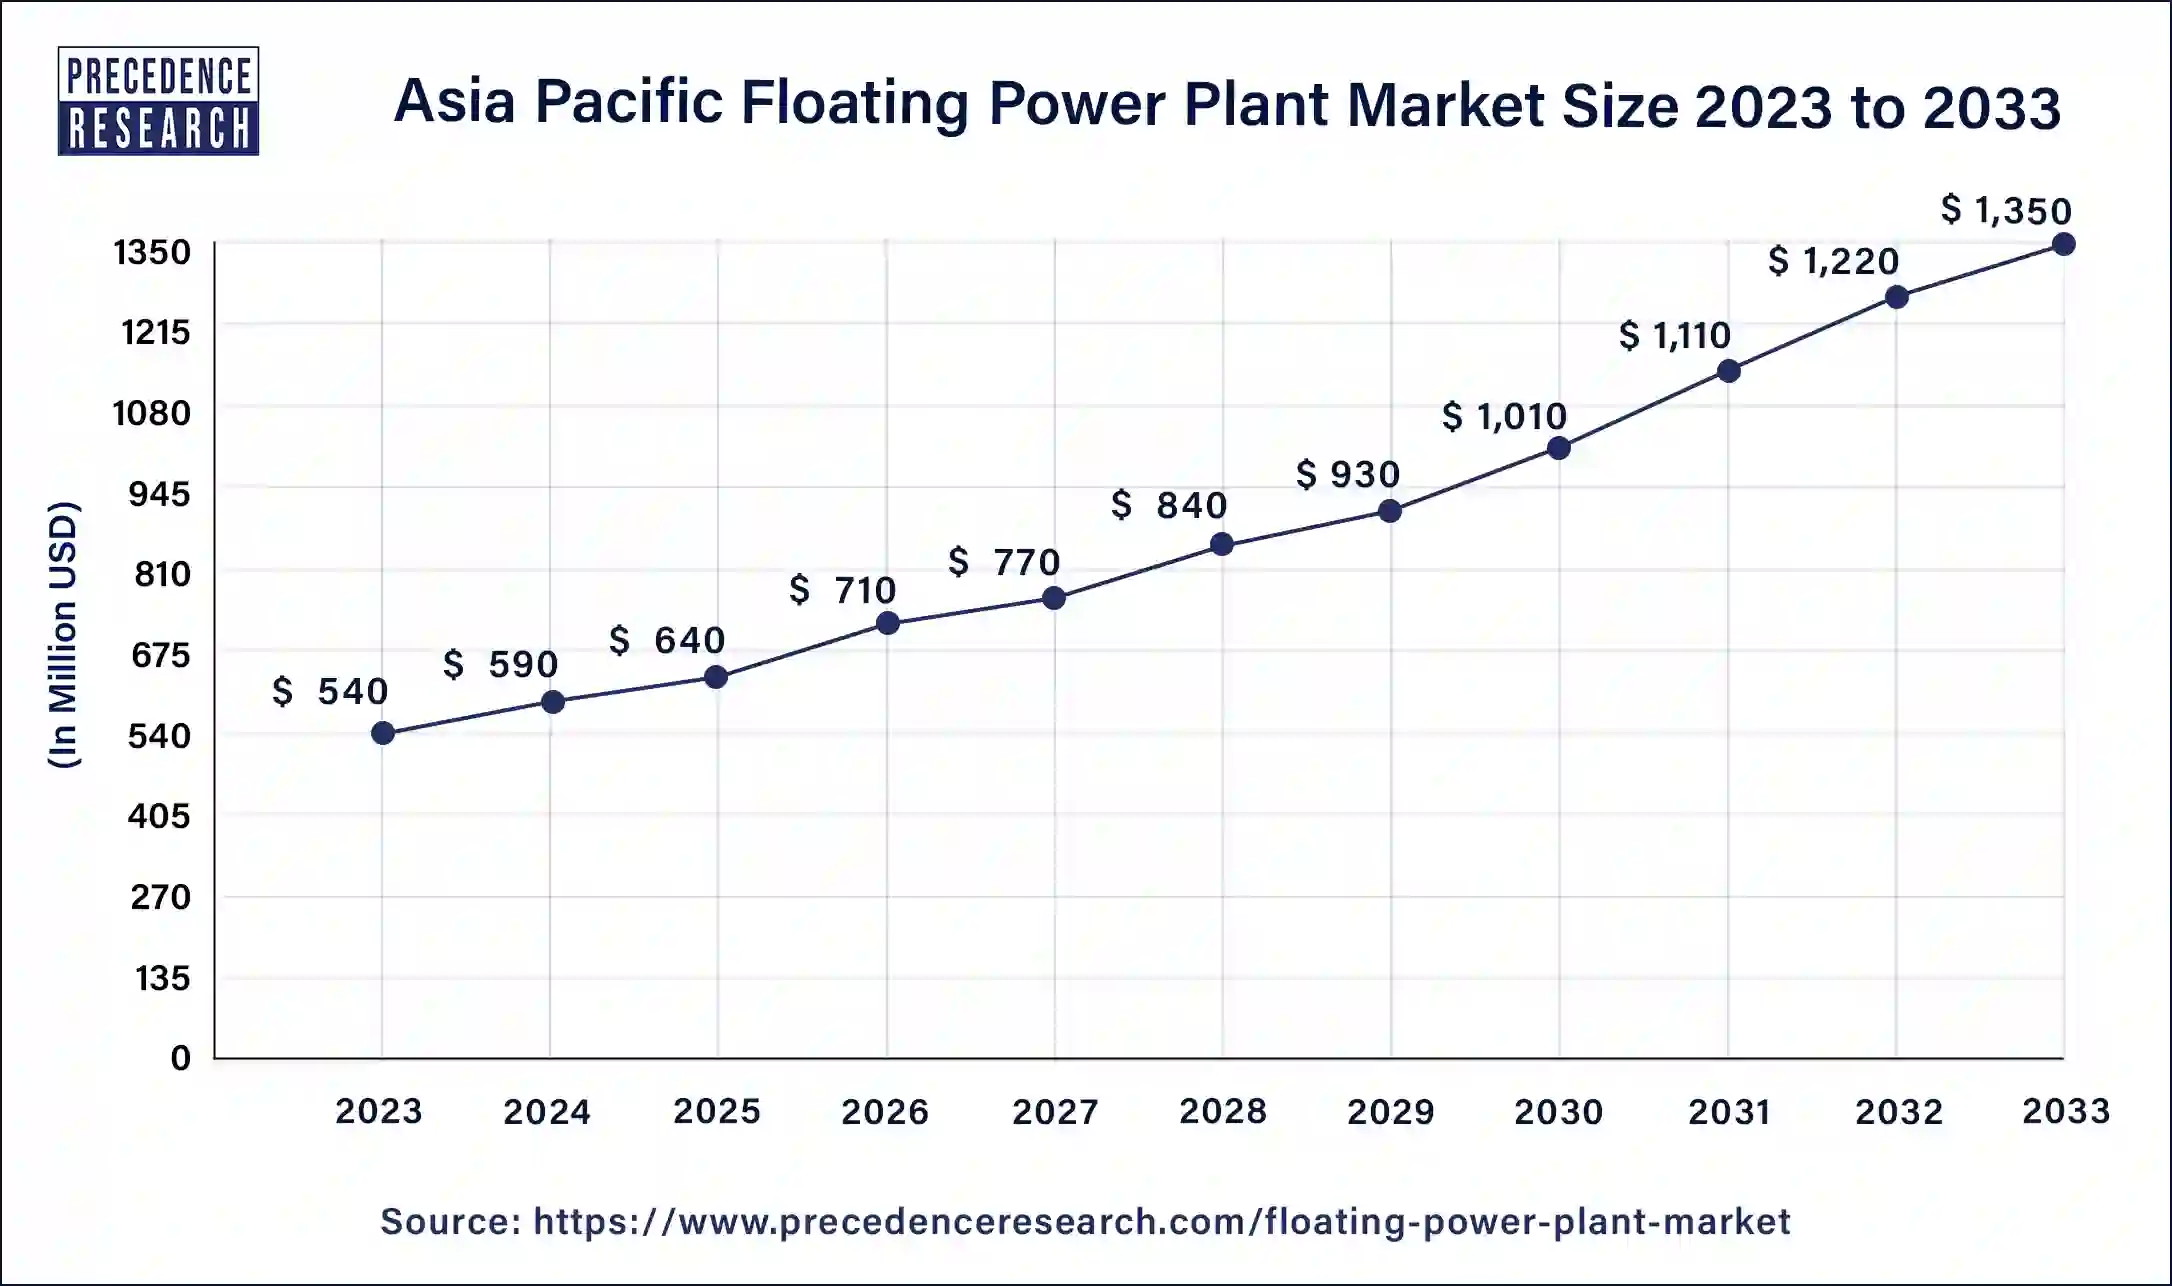 Asia Pacific Floating Power Plant Market Size 2024 to 2033